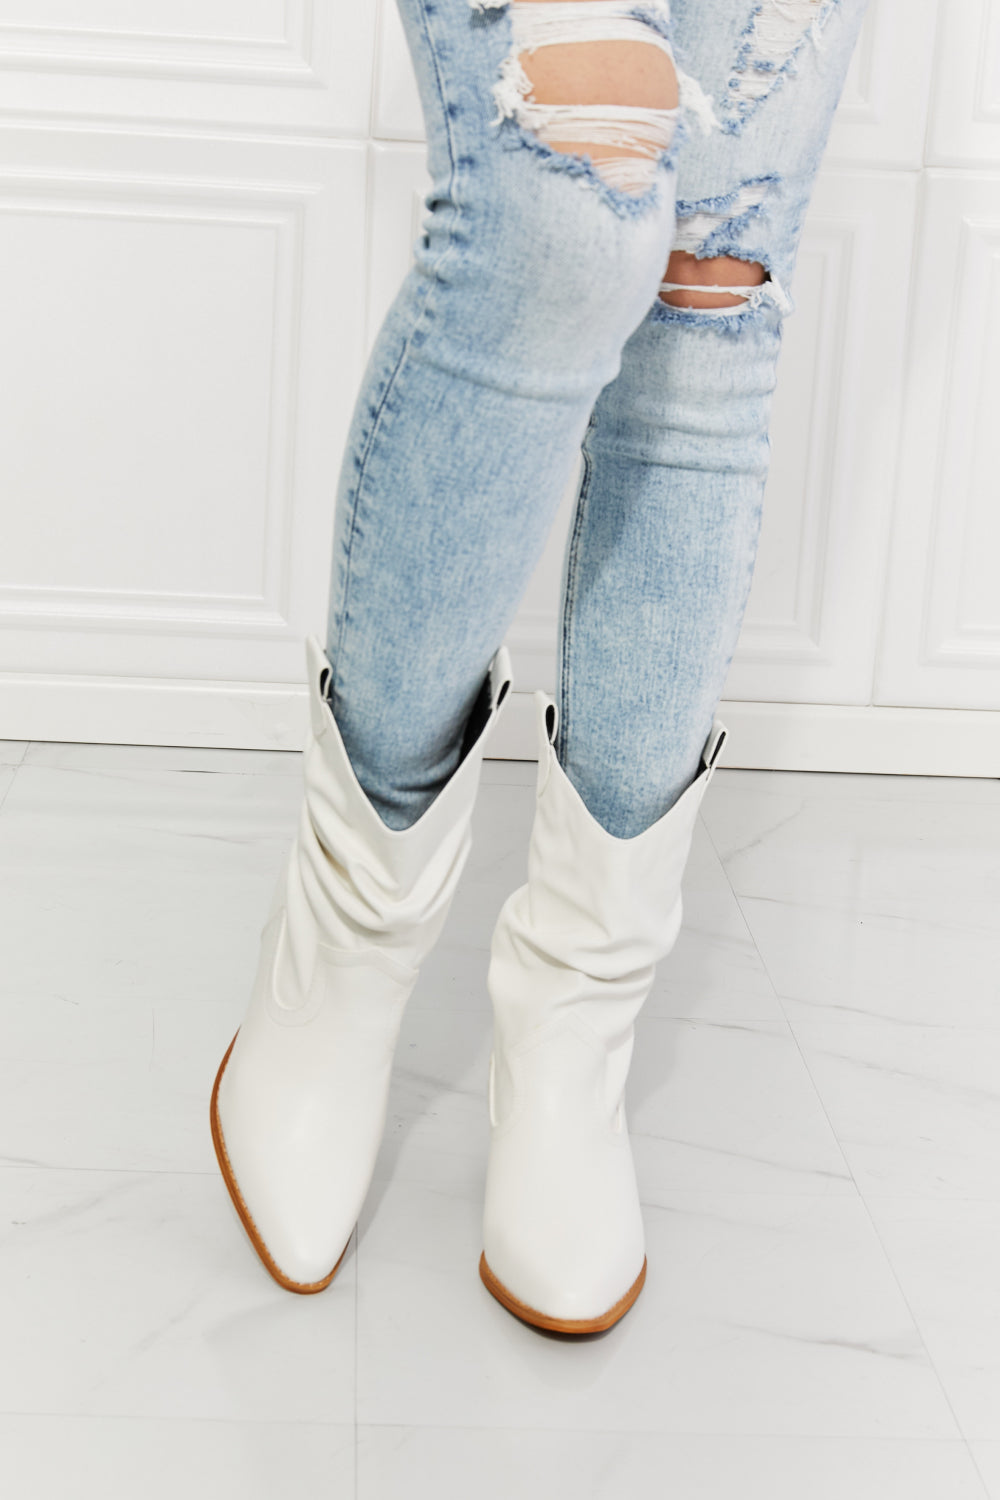 MMShoes Better in Texas Scrunch White Cowgirl Boots - Ships from The Us - women's boots at TFC&H Co.